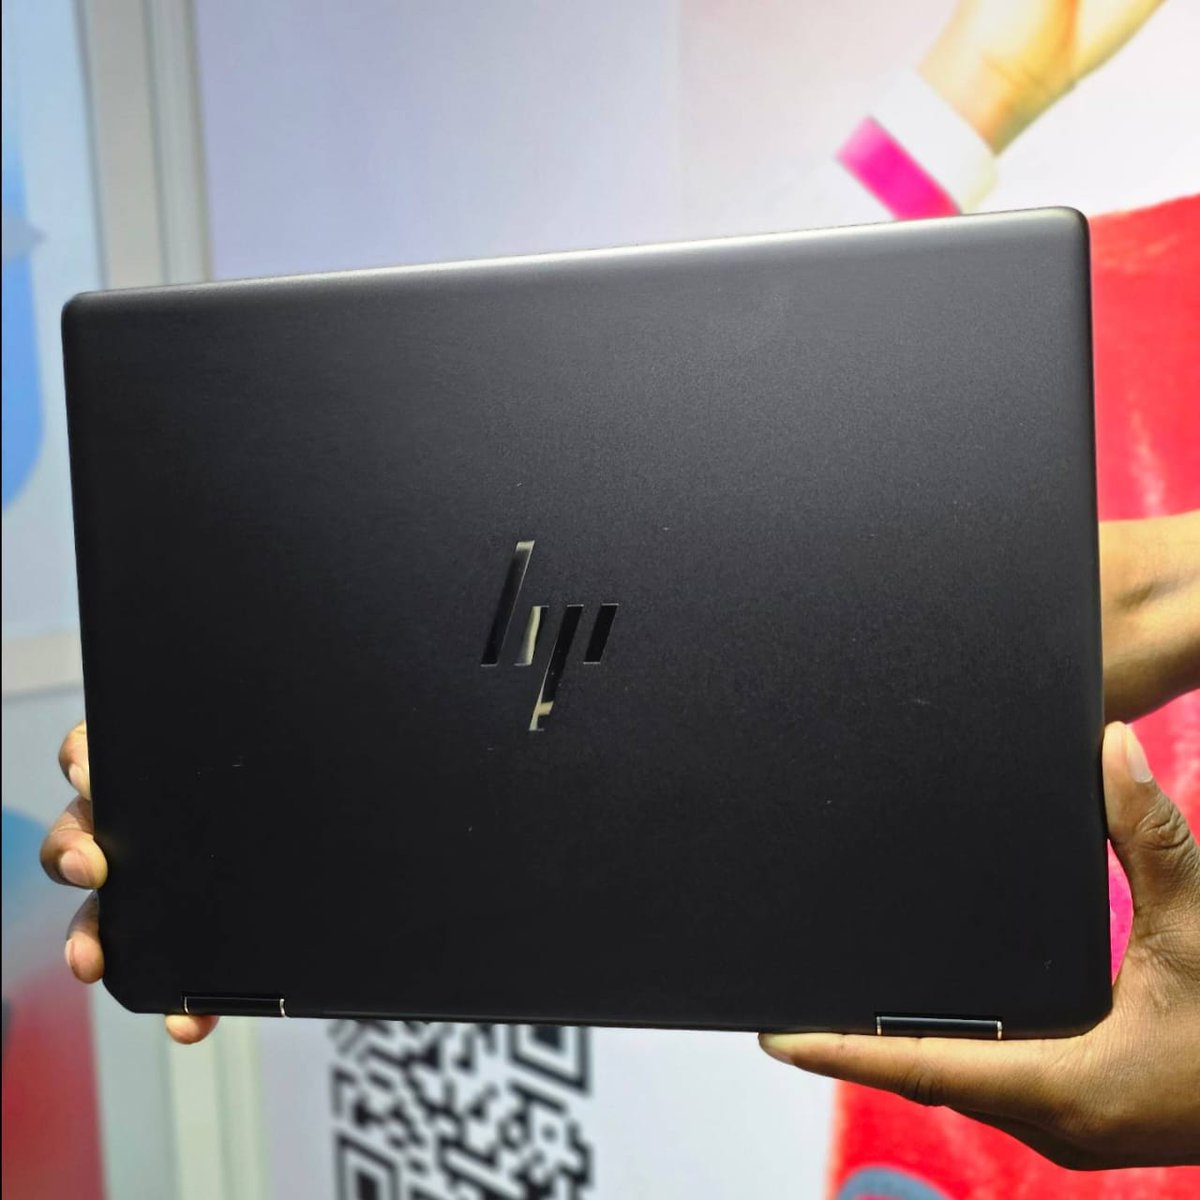 Hp Spectre is always powerful durable machine.We have hp spectre 13 from our store at affordable price. The 12th gen series with gem cut is very sleek and light.Has core i5 processors and 10 total cores meaning its speed is very perfect upto 4.0ghz plus.The storage is 16GB Ram